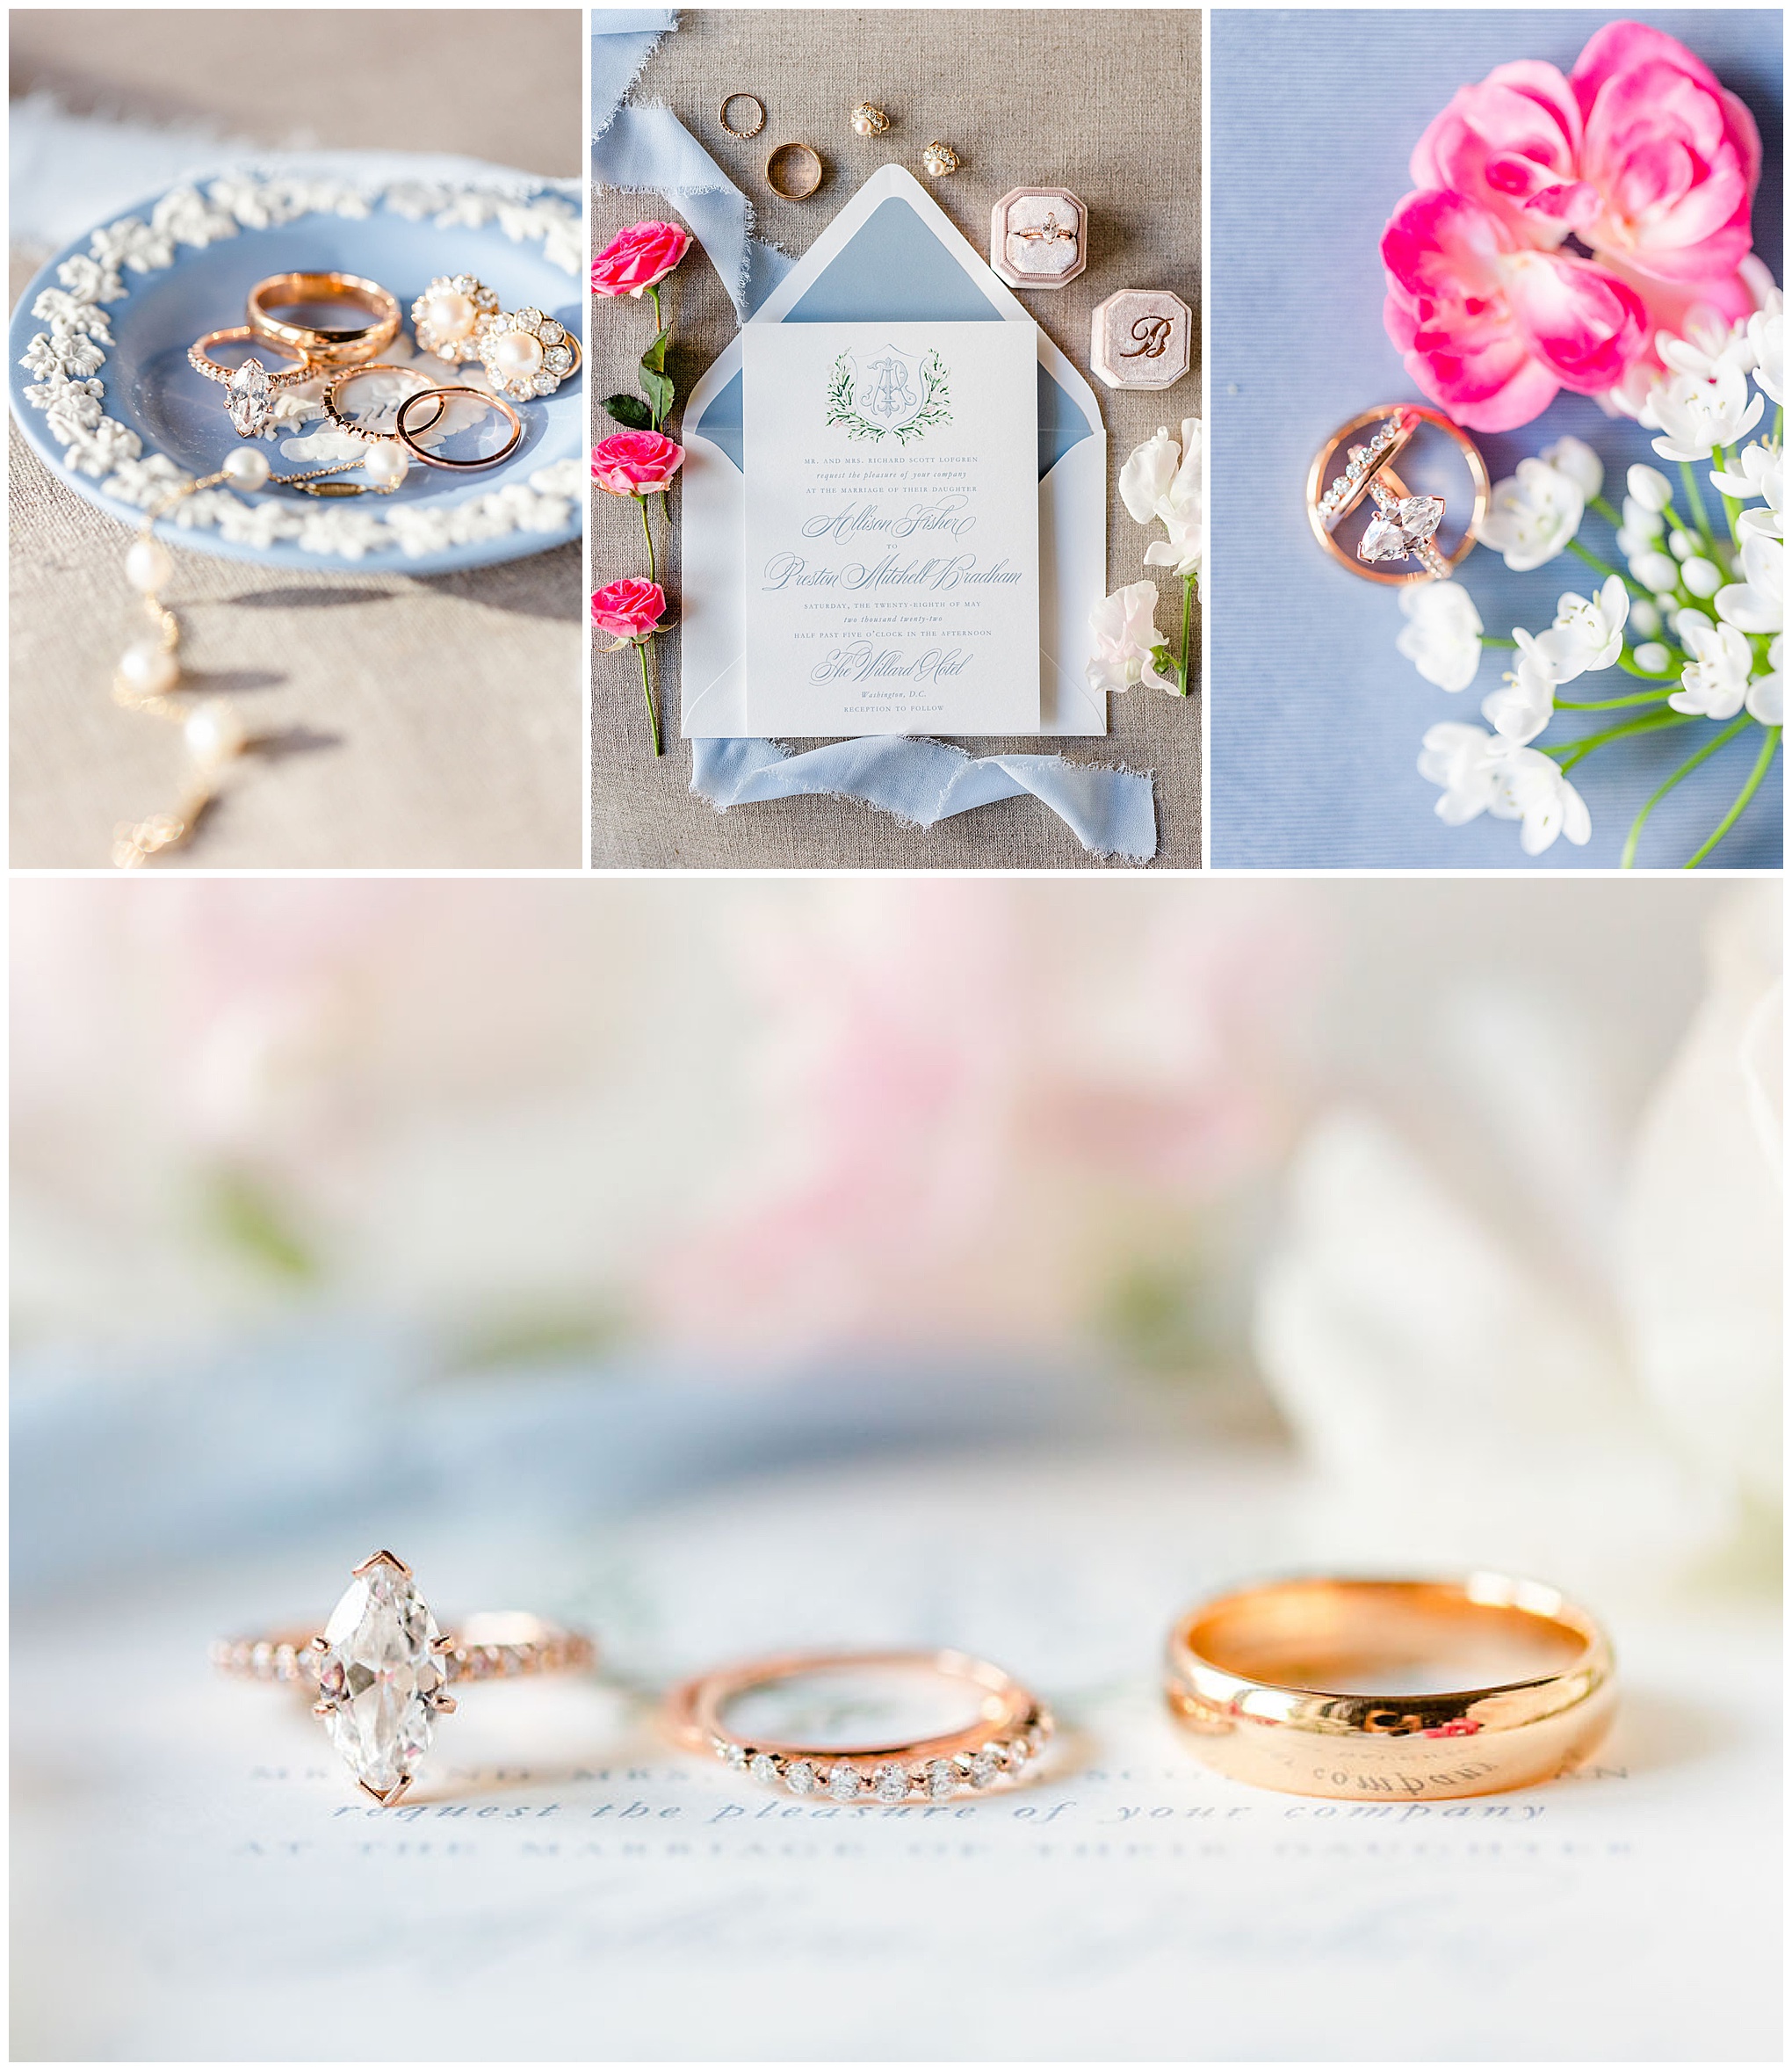 bridal details photo session, bridal details flatlay, flatlay photos, wedding details, wedding details photos, DC wedding photographer, wedding photography details, special wedding photos, flatlay photo session, DC wedding photographer, Rachel E.H. Photography, gold wedding rings, baby blue jewelry dish